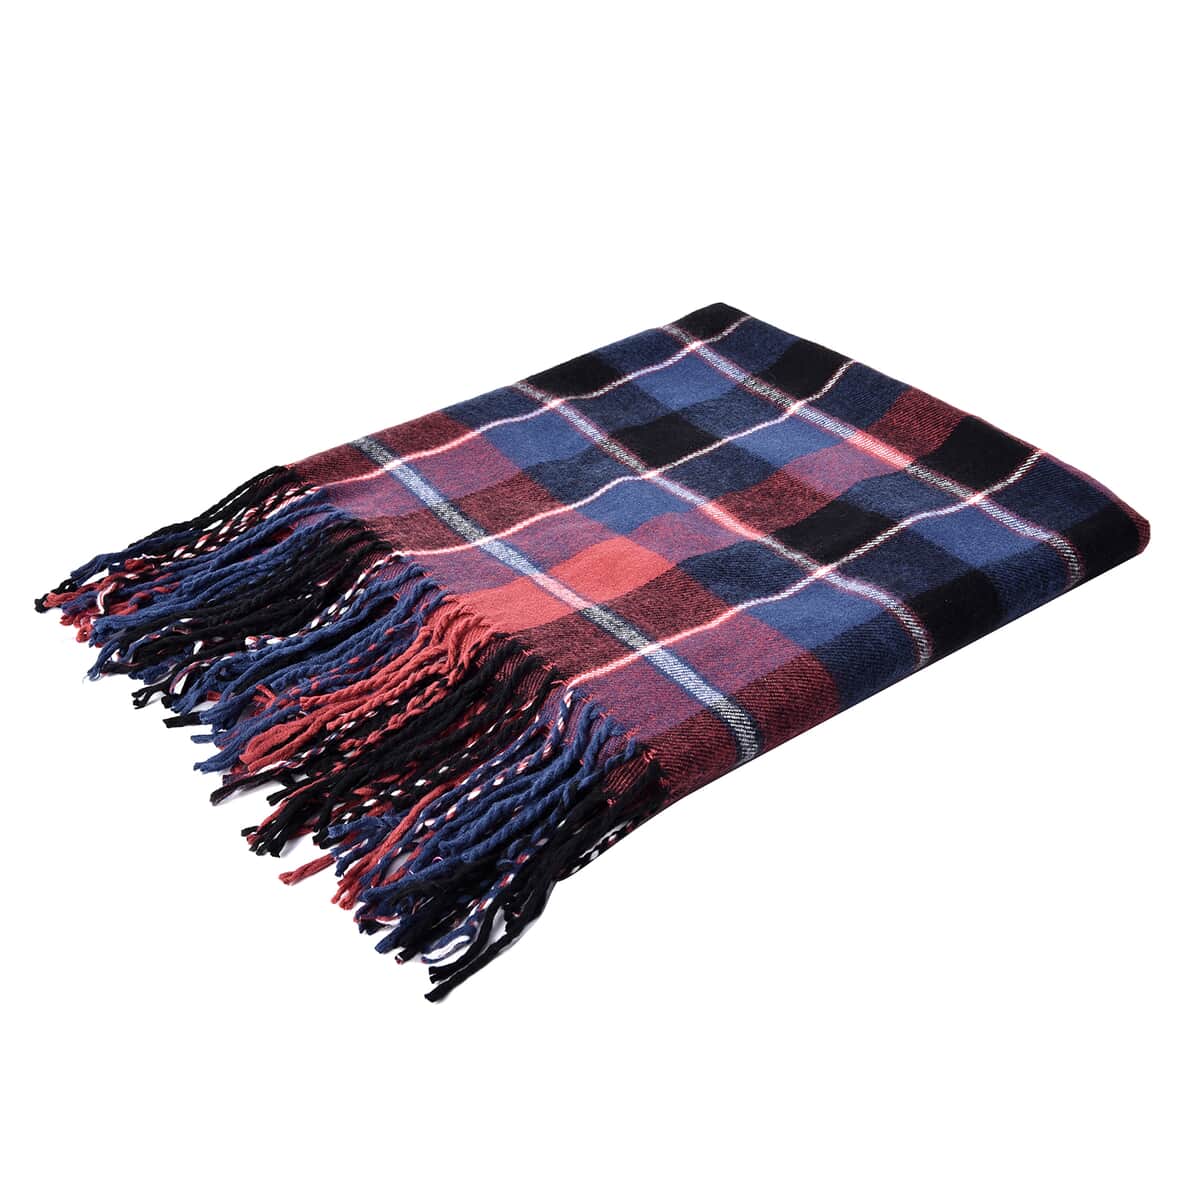 Homesmart Acrylic Multi Color Checker Pattern Throw Blanket with Tassels for Couch for Women, Men and Kids image number 0